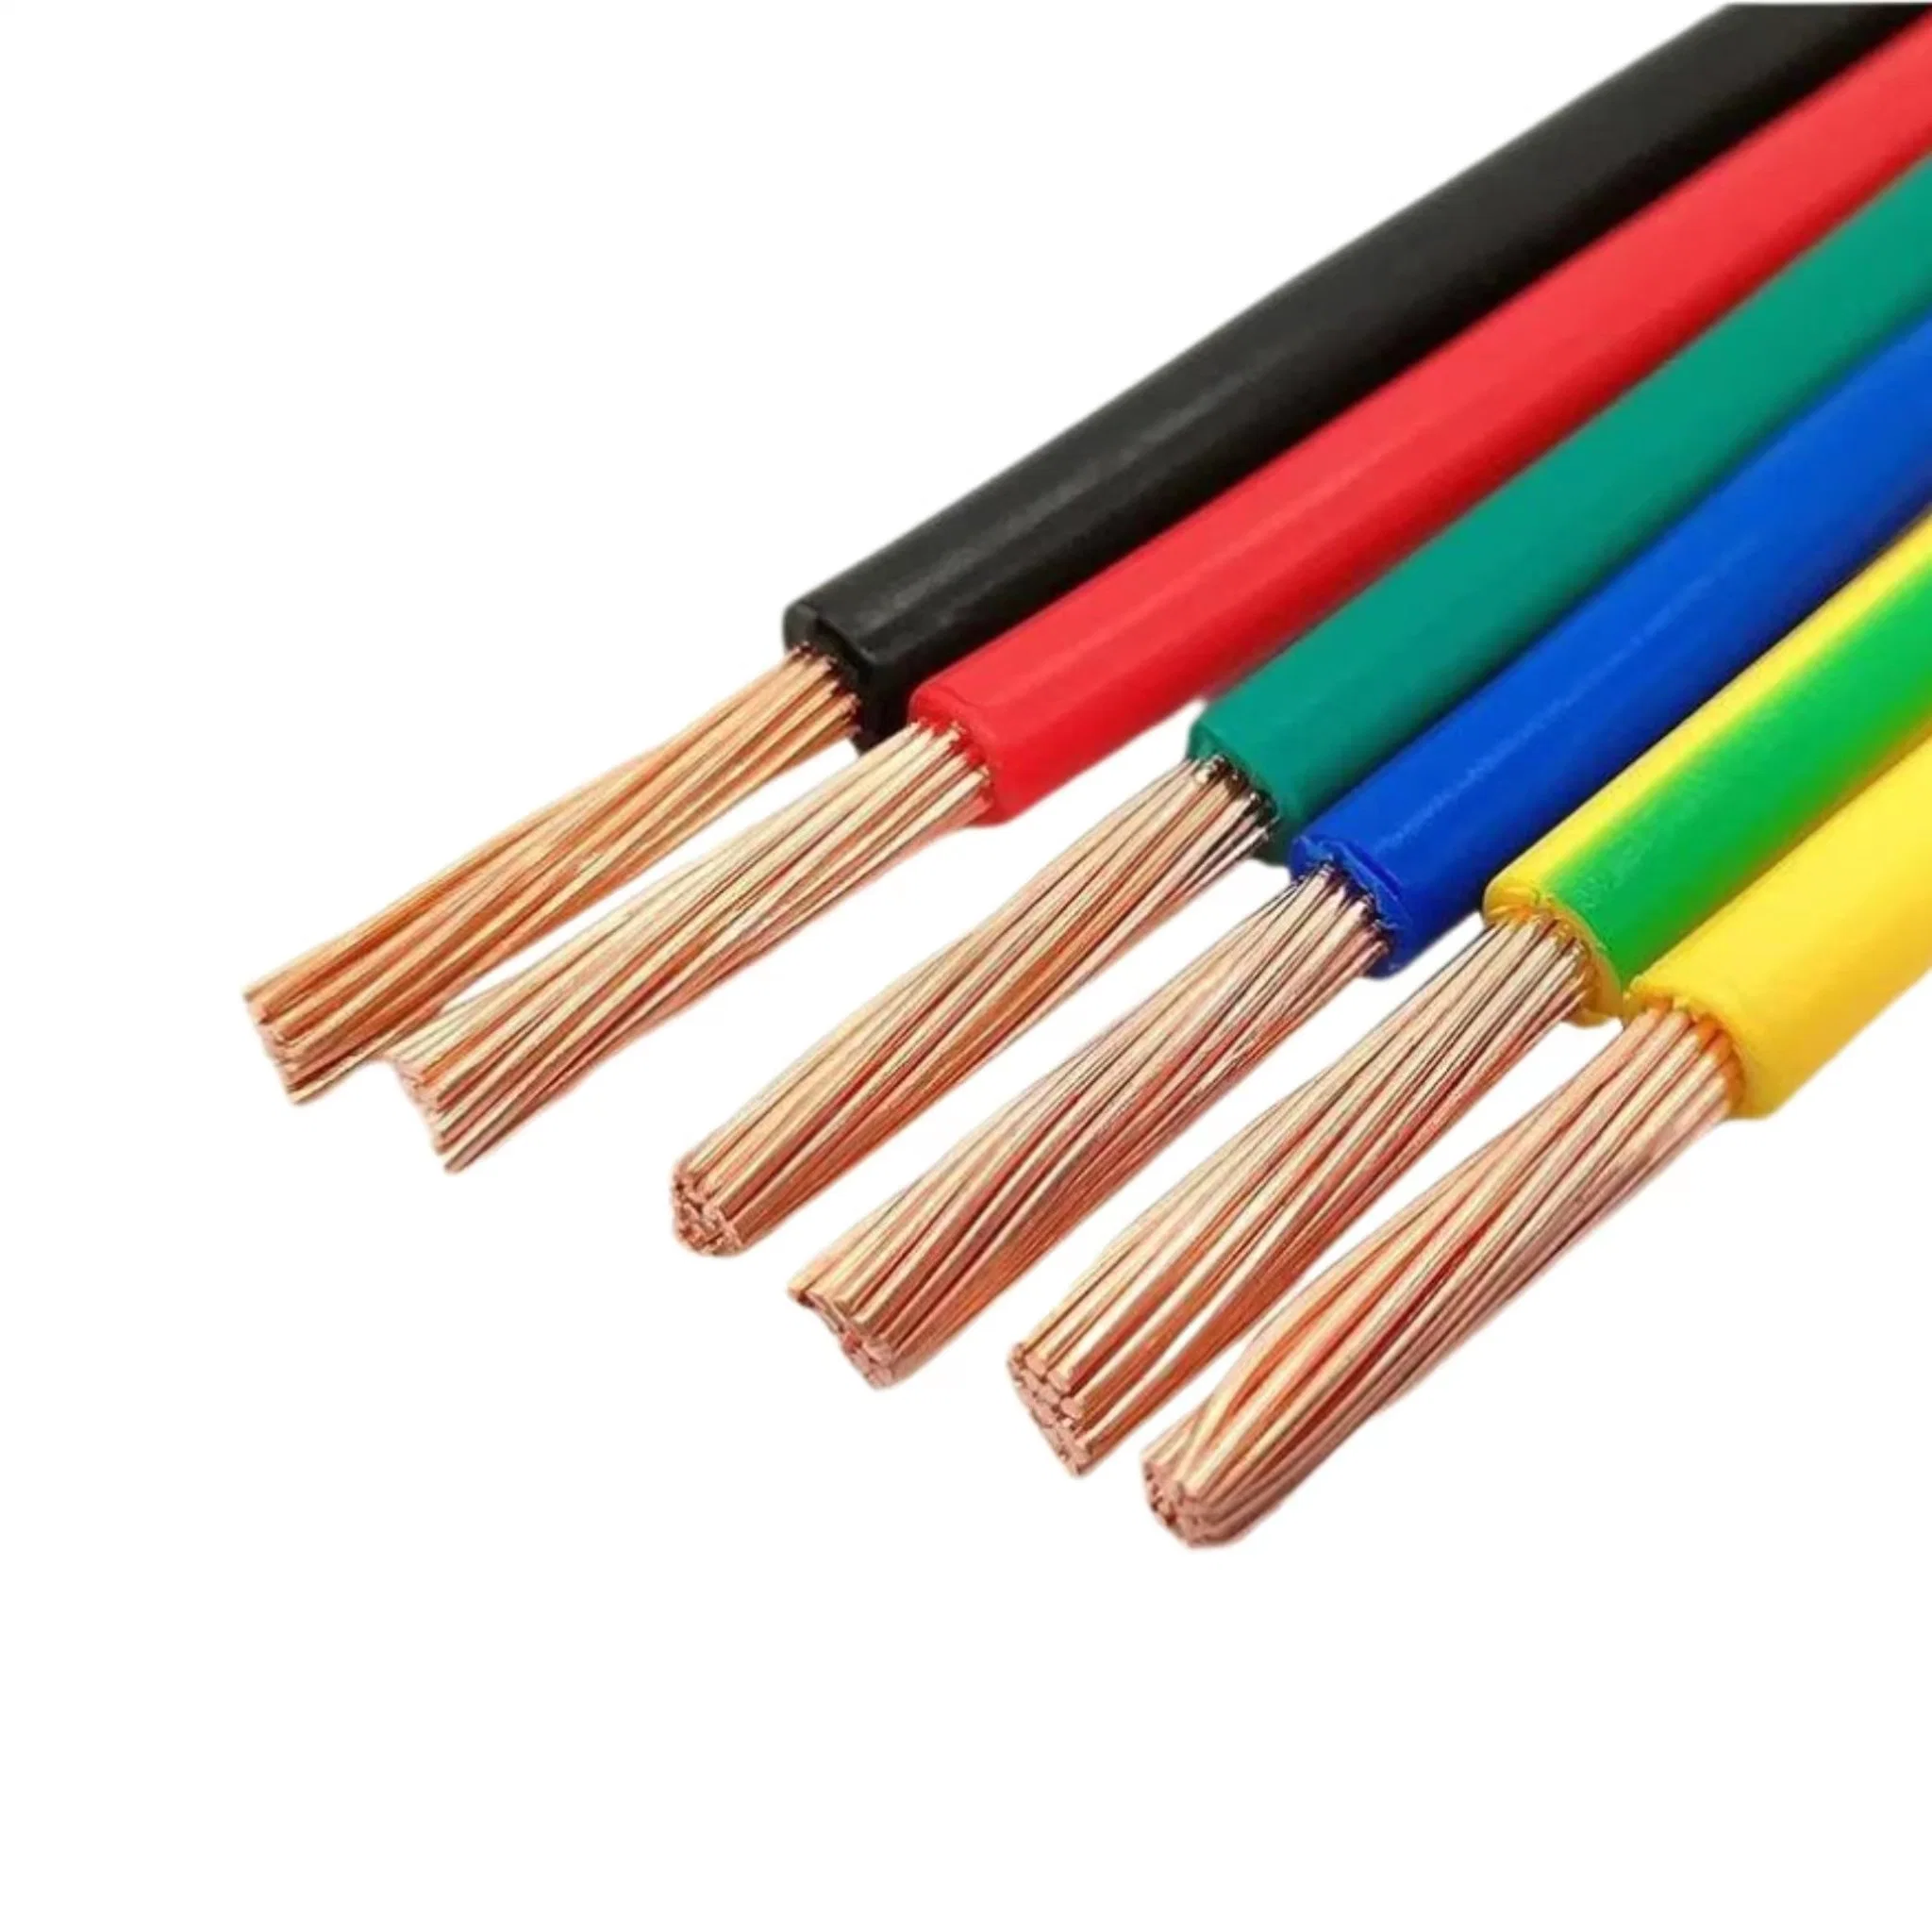 Cables Copper Core PVC Insulated Electrical Cable Thw Cable